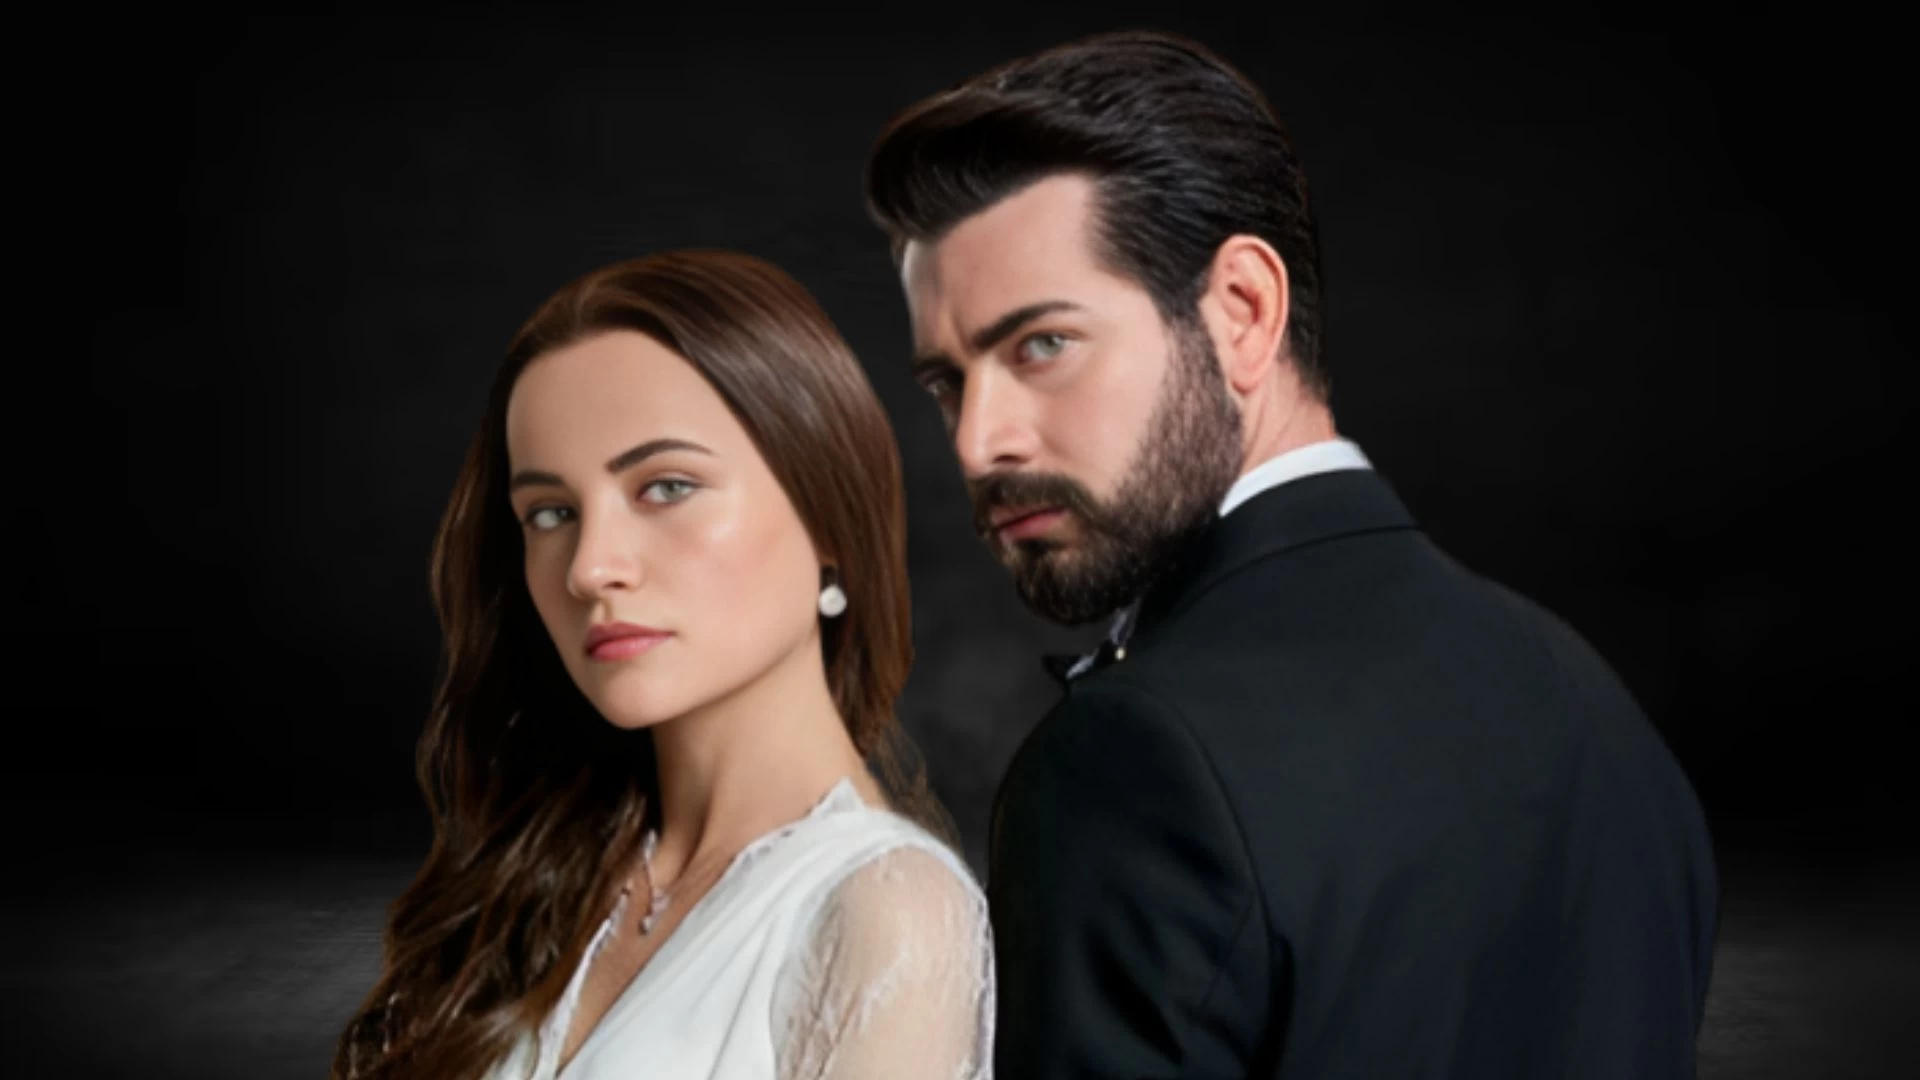 Kan Cicekleri Season 2 Episode 20 Release Date and Time, Countdown, When is it Coming Out?